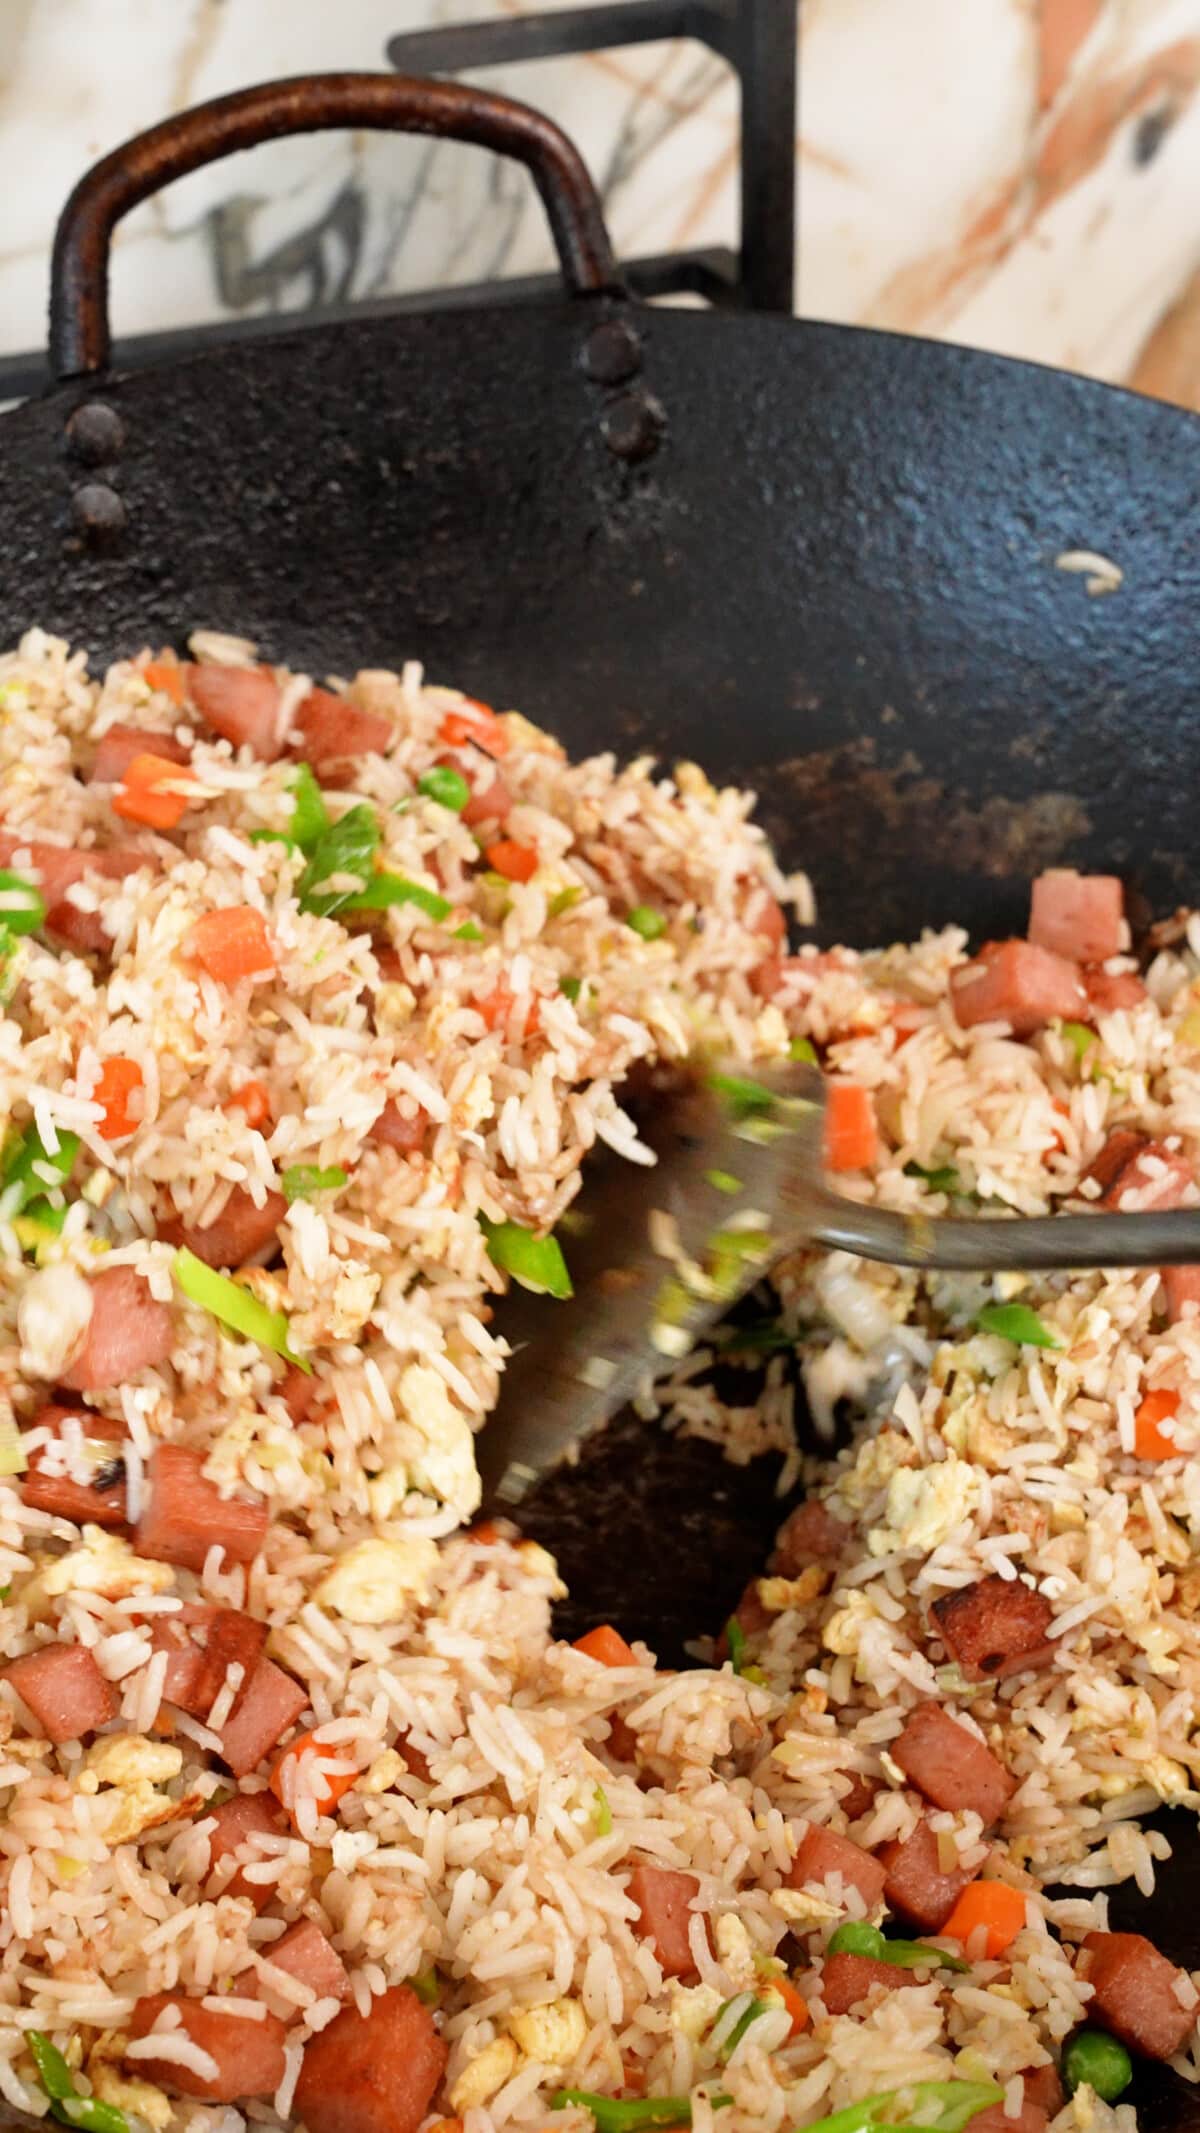 Mixing Spam Fried Rice with a spatula.